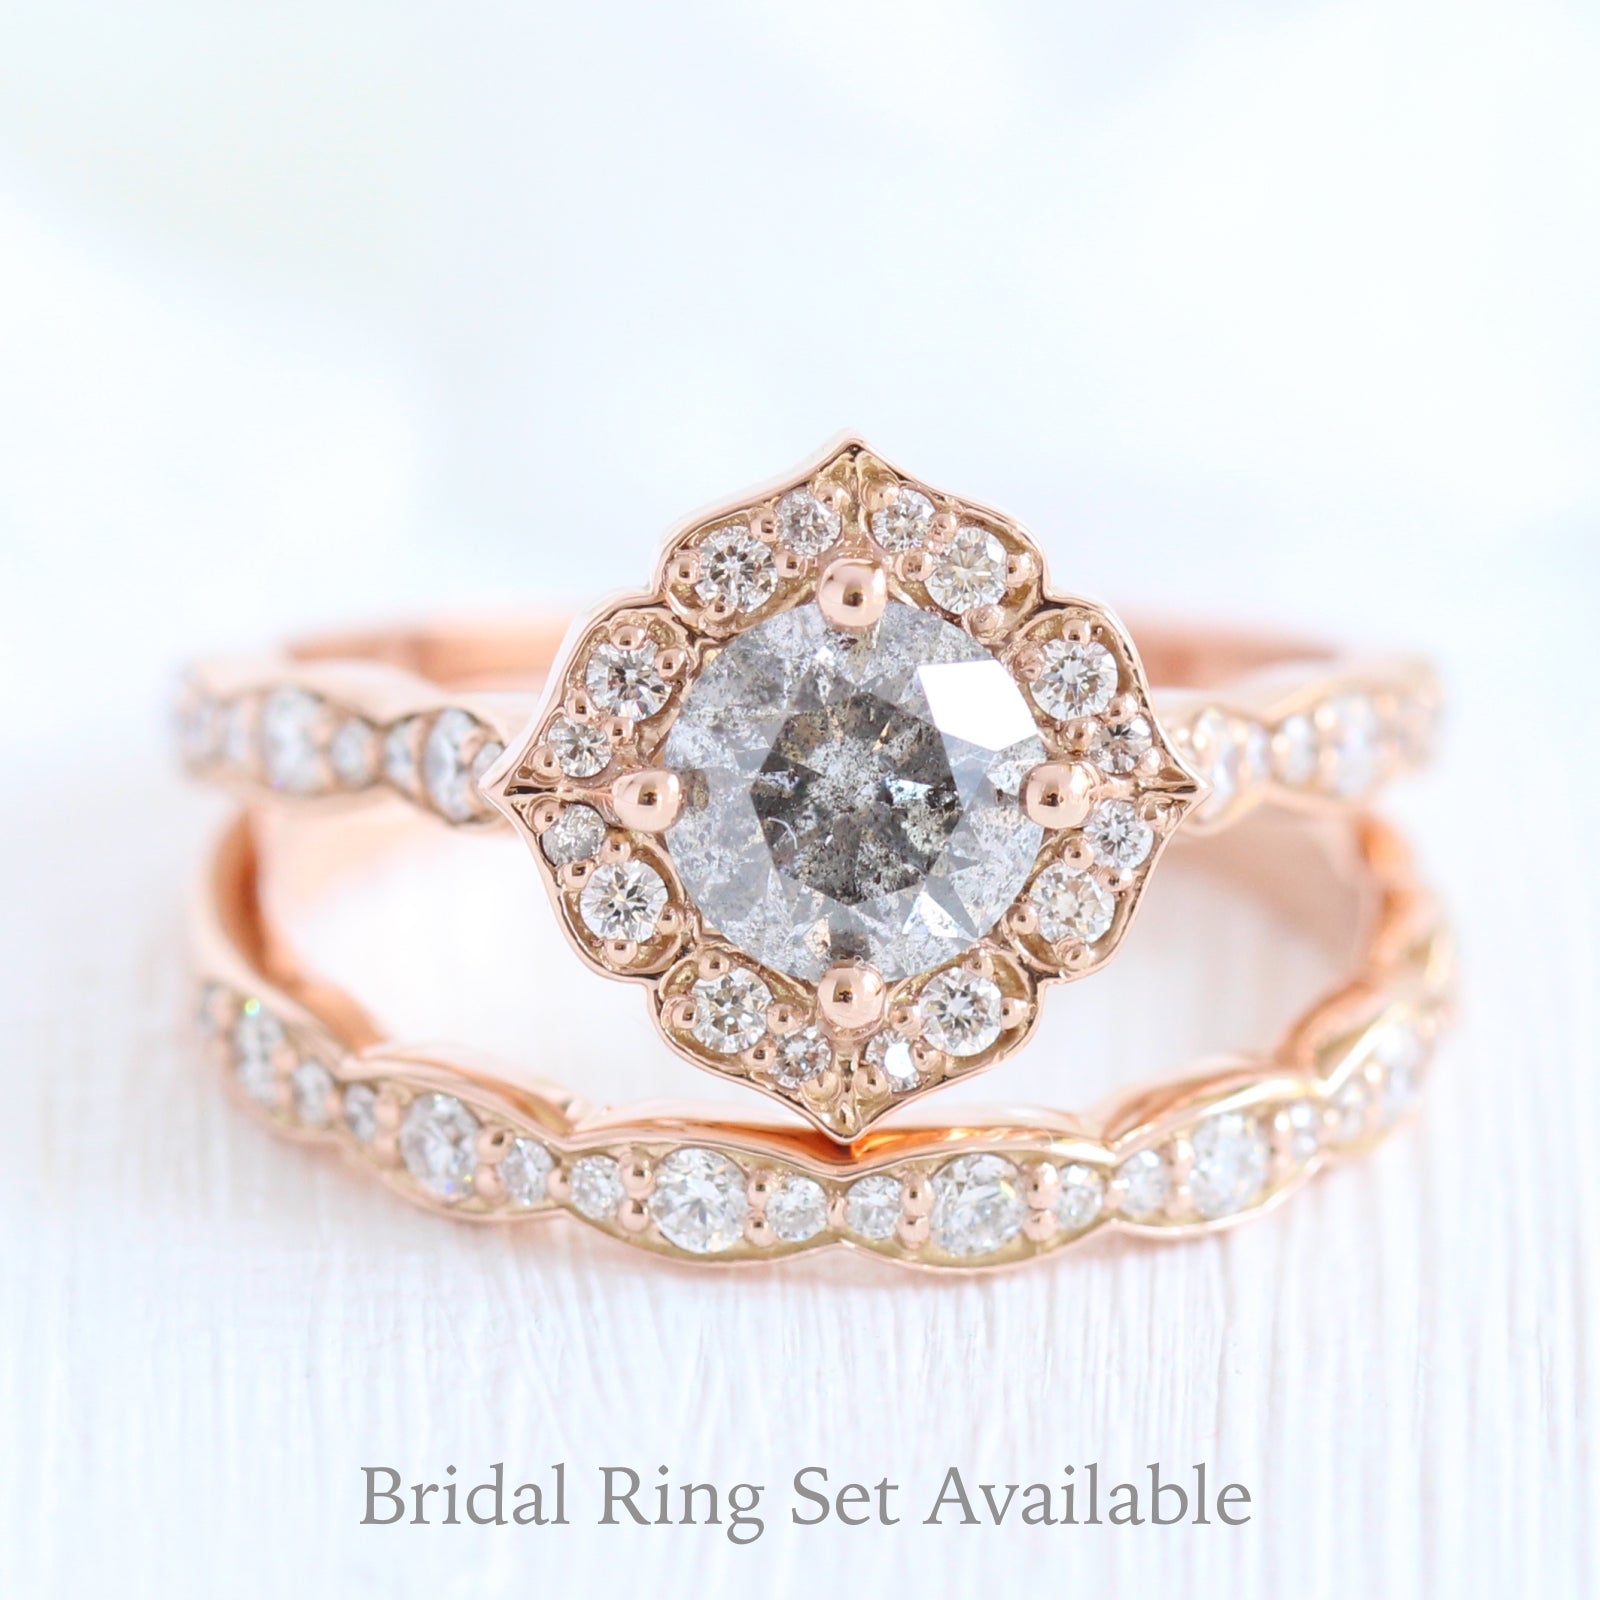 Salt and pepper grey diamond engagement ring in rose gold vintage floral diamond band by la more design jewelry